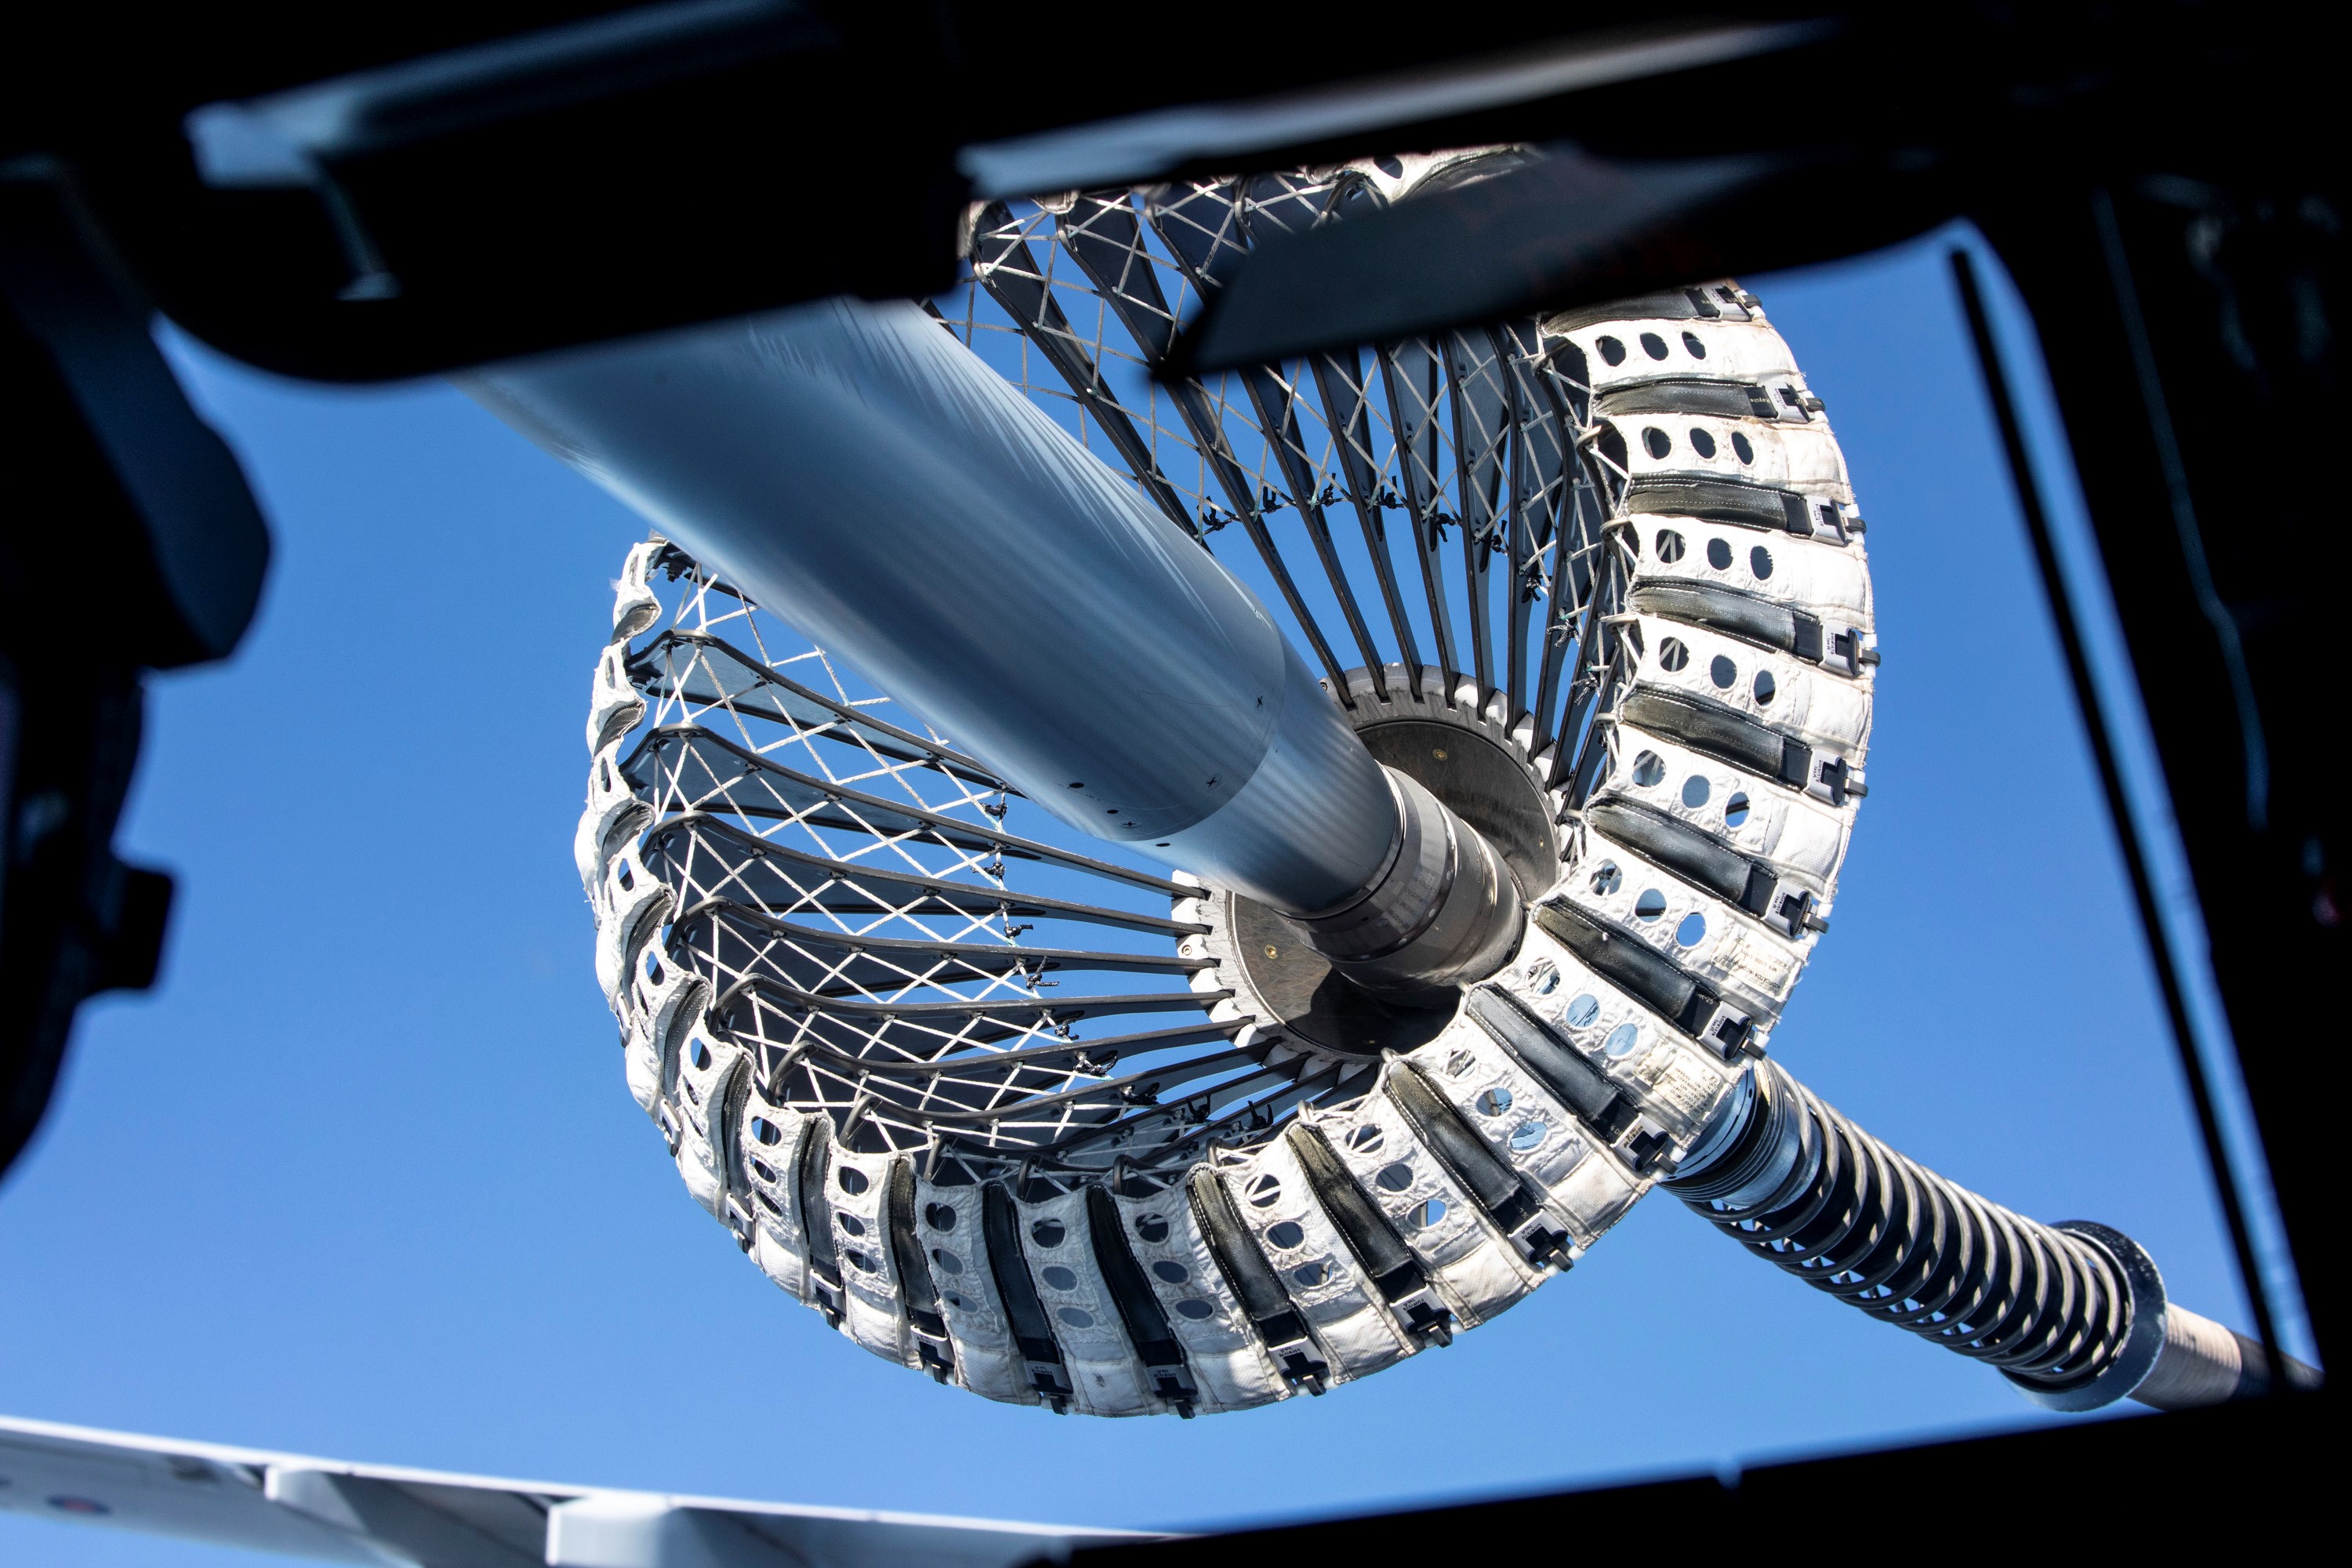 Image shows close up of air-to-air refuelling pipe equipment.